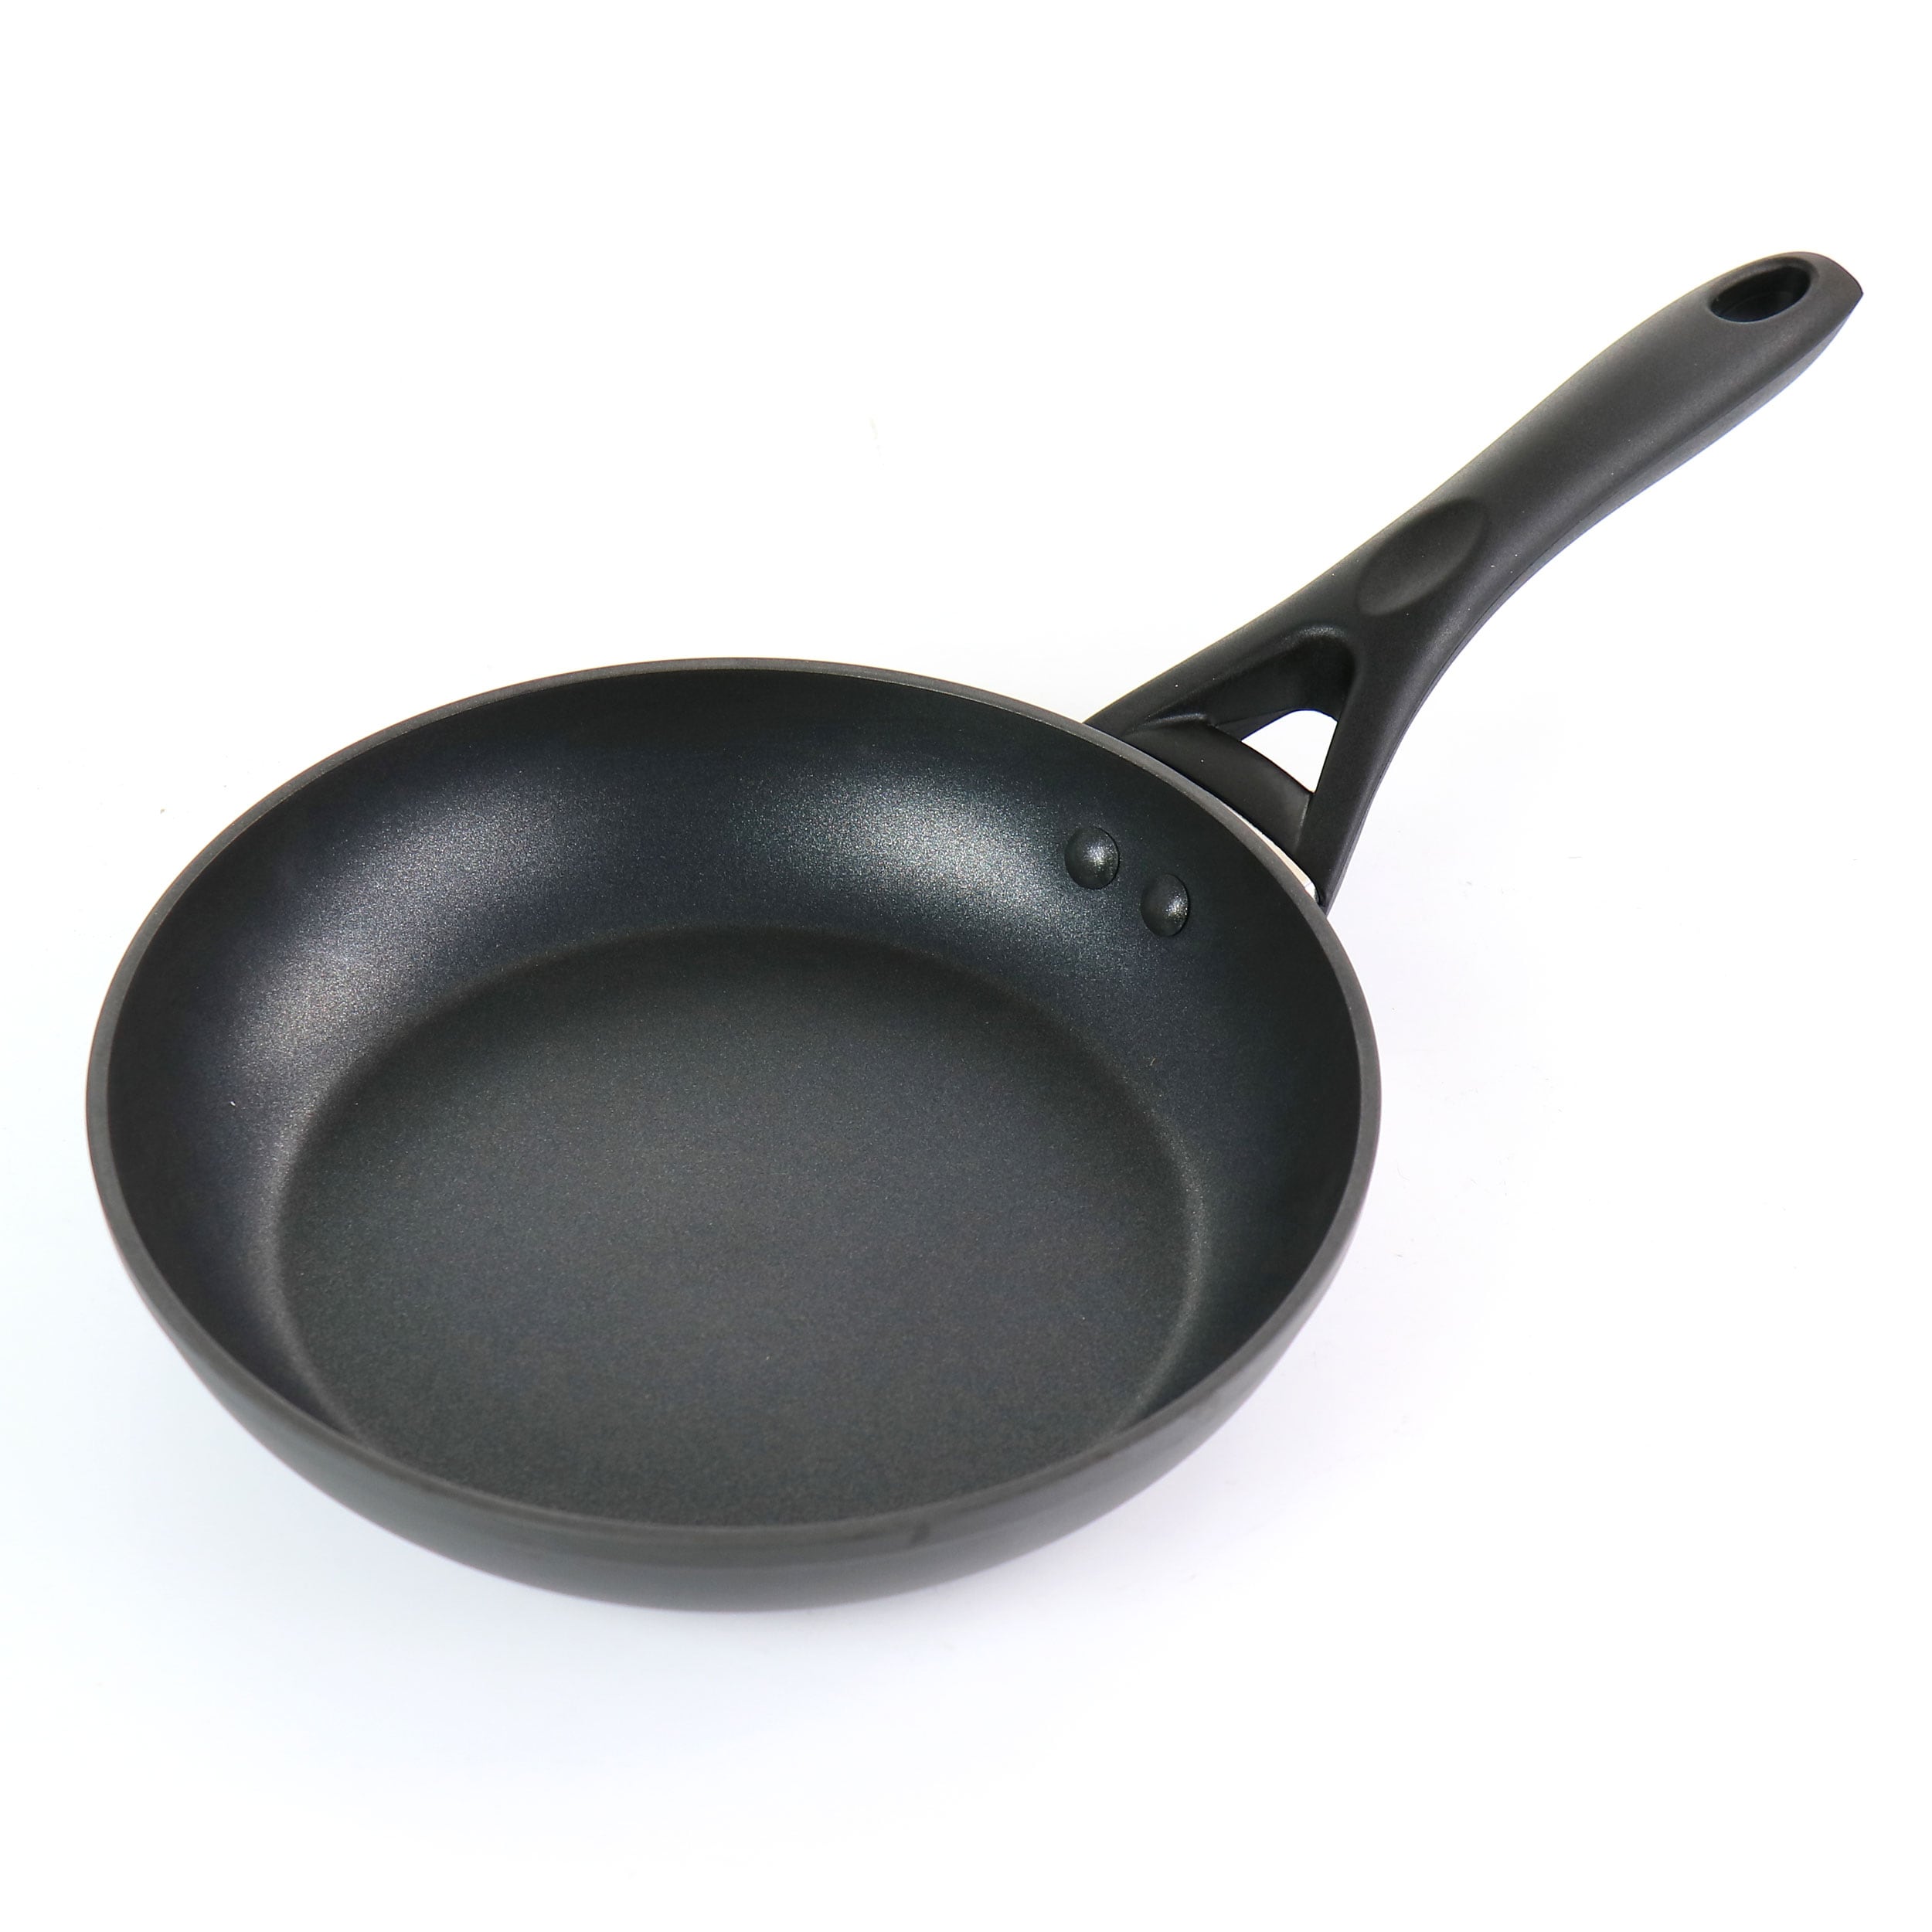 Speckled Gray Non-Stick Fry Pan, 9.5, Sold by at Home